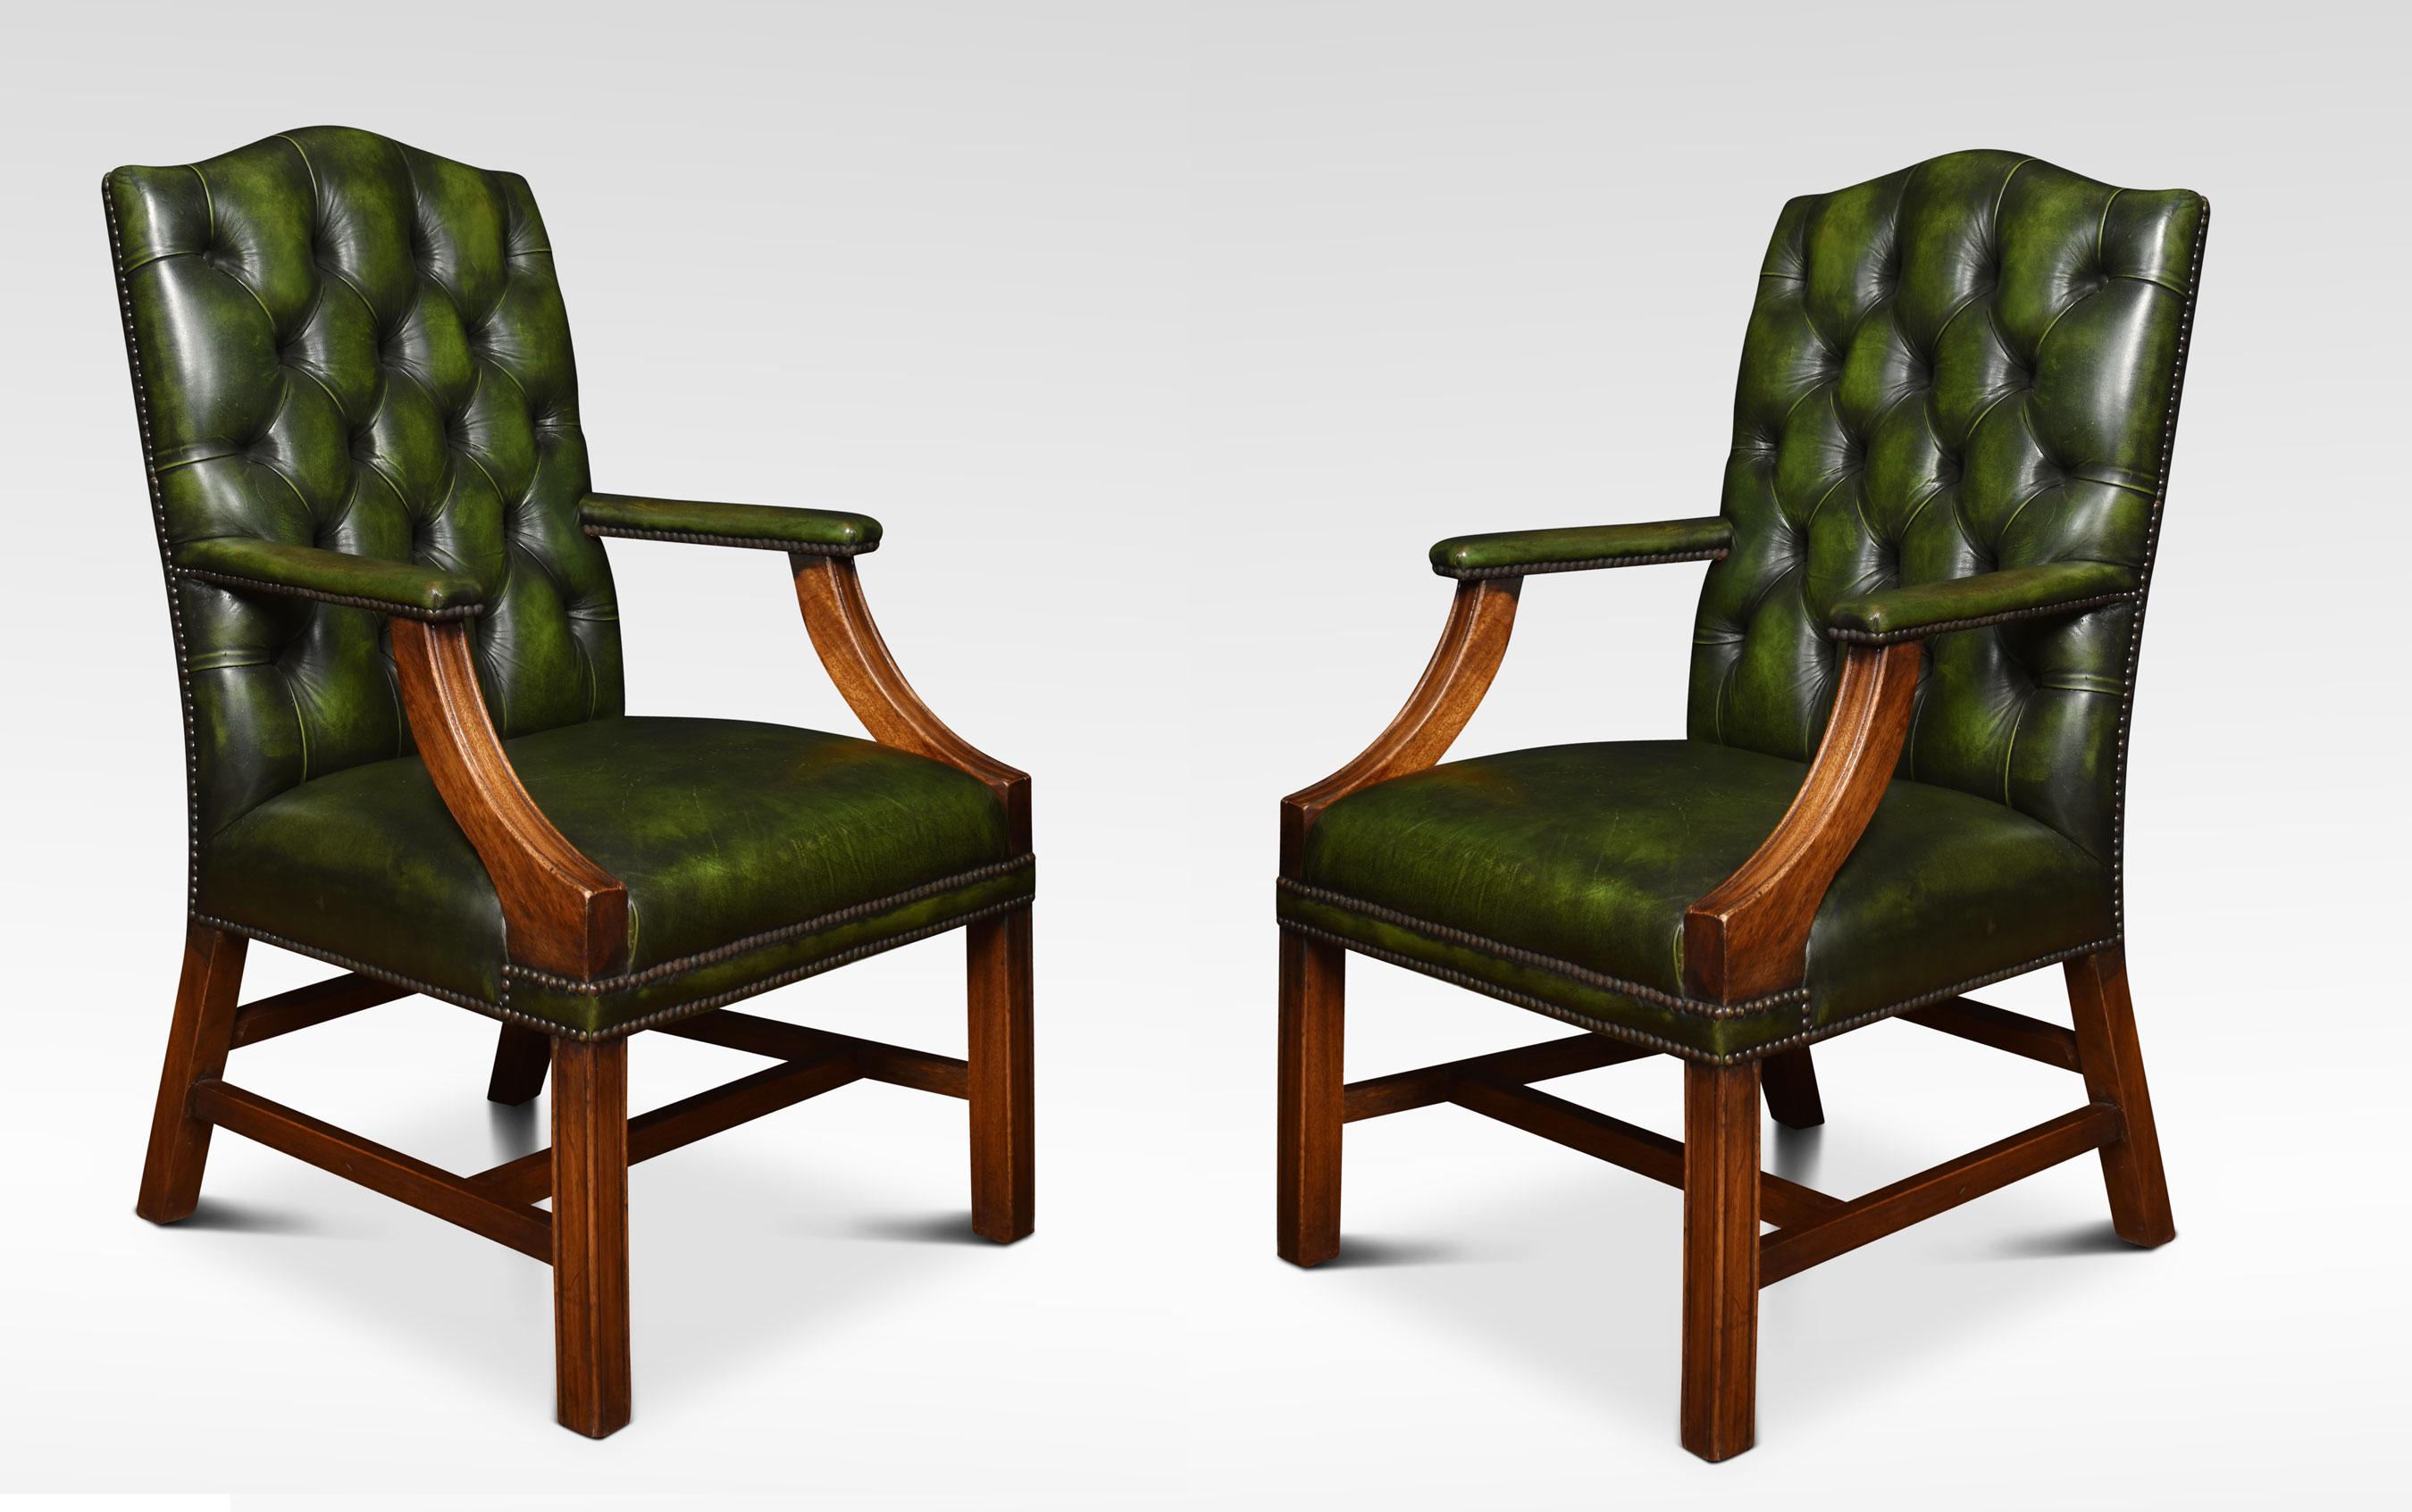 Pair Georgian style leather Gainsborough library chairs, having deep buttoned green leather backs and seats with brass studded edges. The solid mahogany framed standing on square legs, united by stretcher.
Dimensions
Height 39.5 inches height to